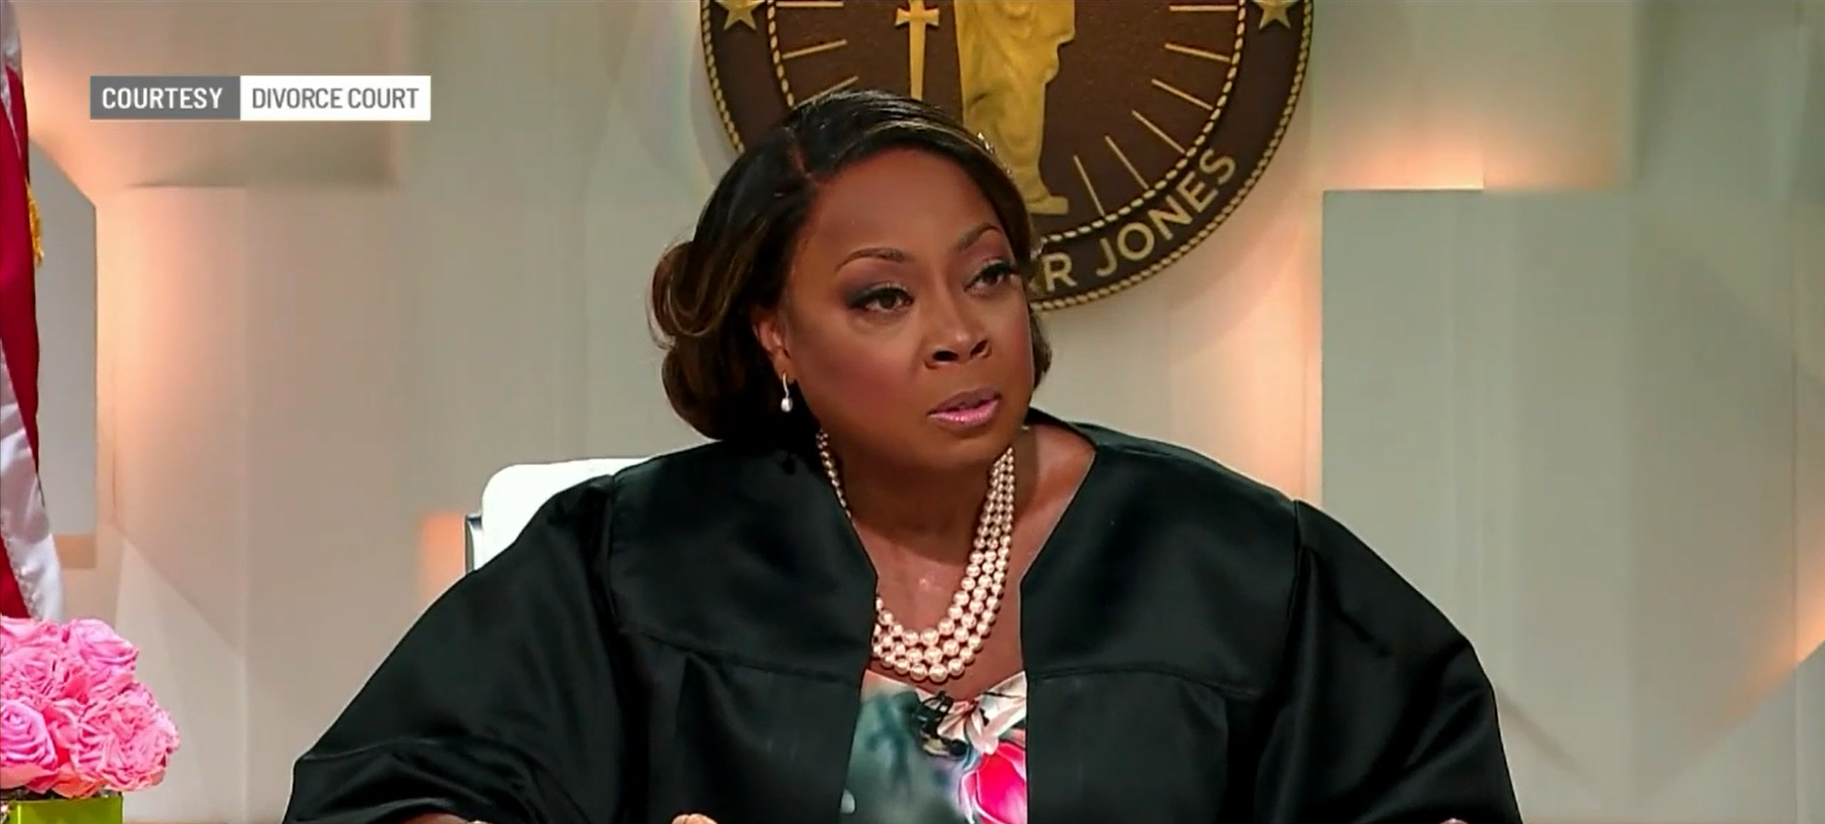 Star Jones takes over as Divorce Court judge Archives WISH TV